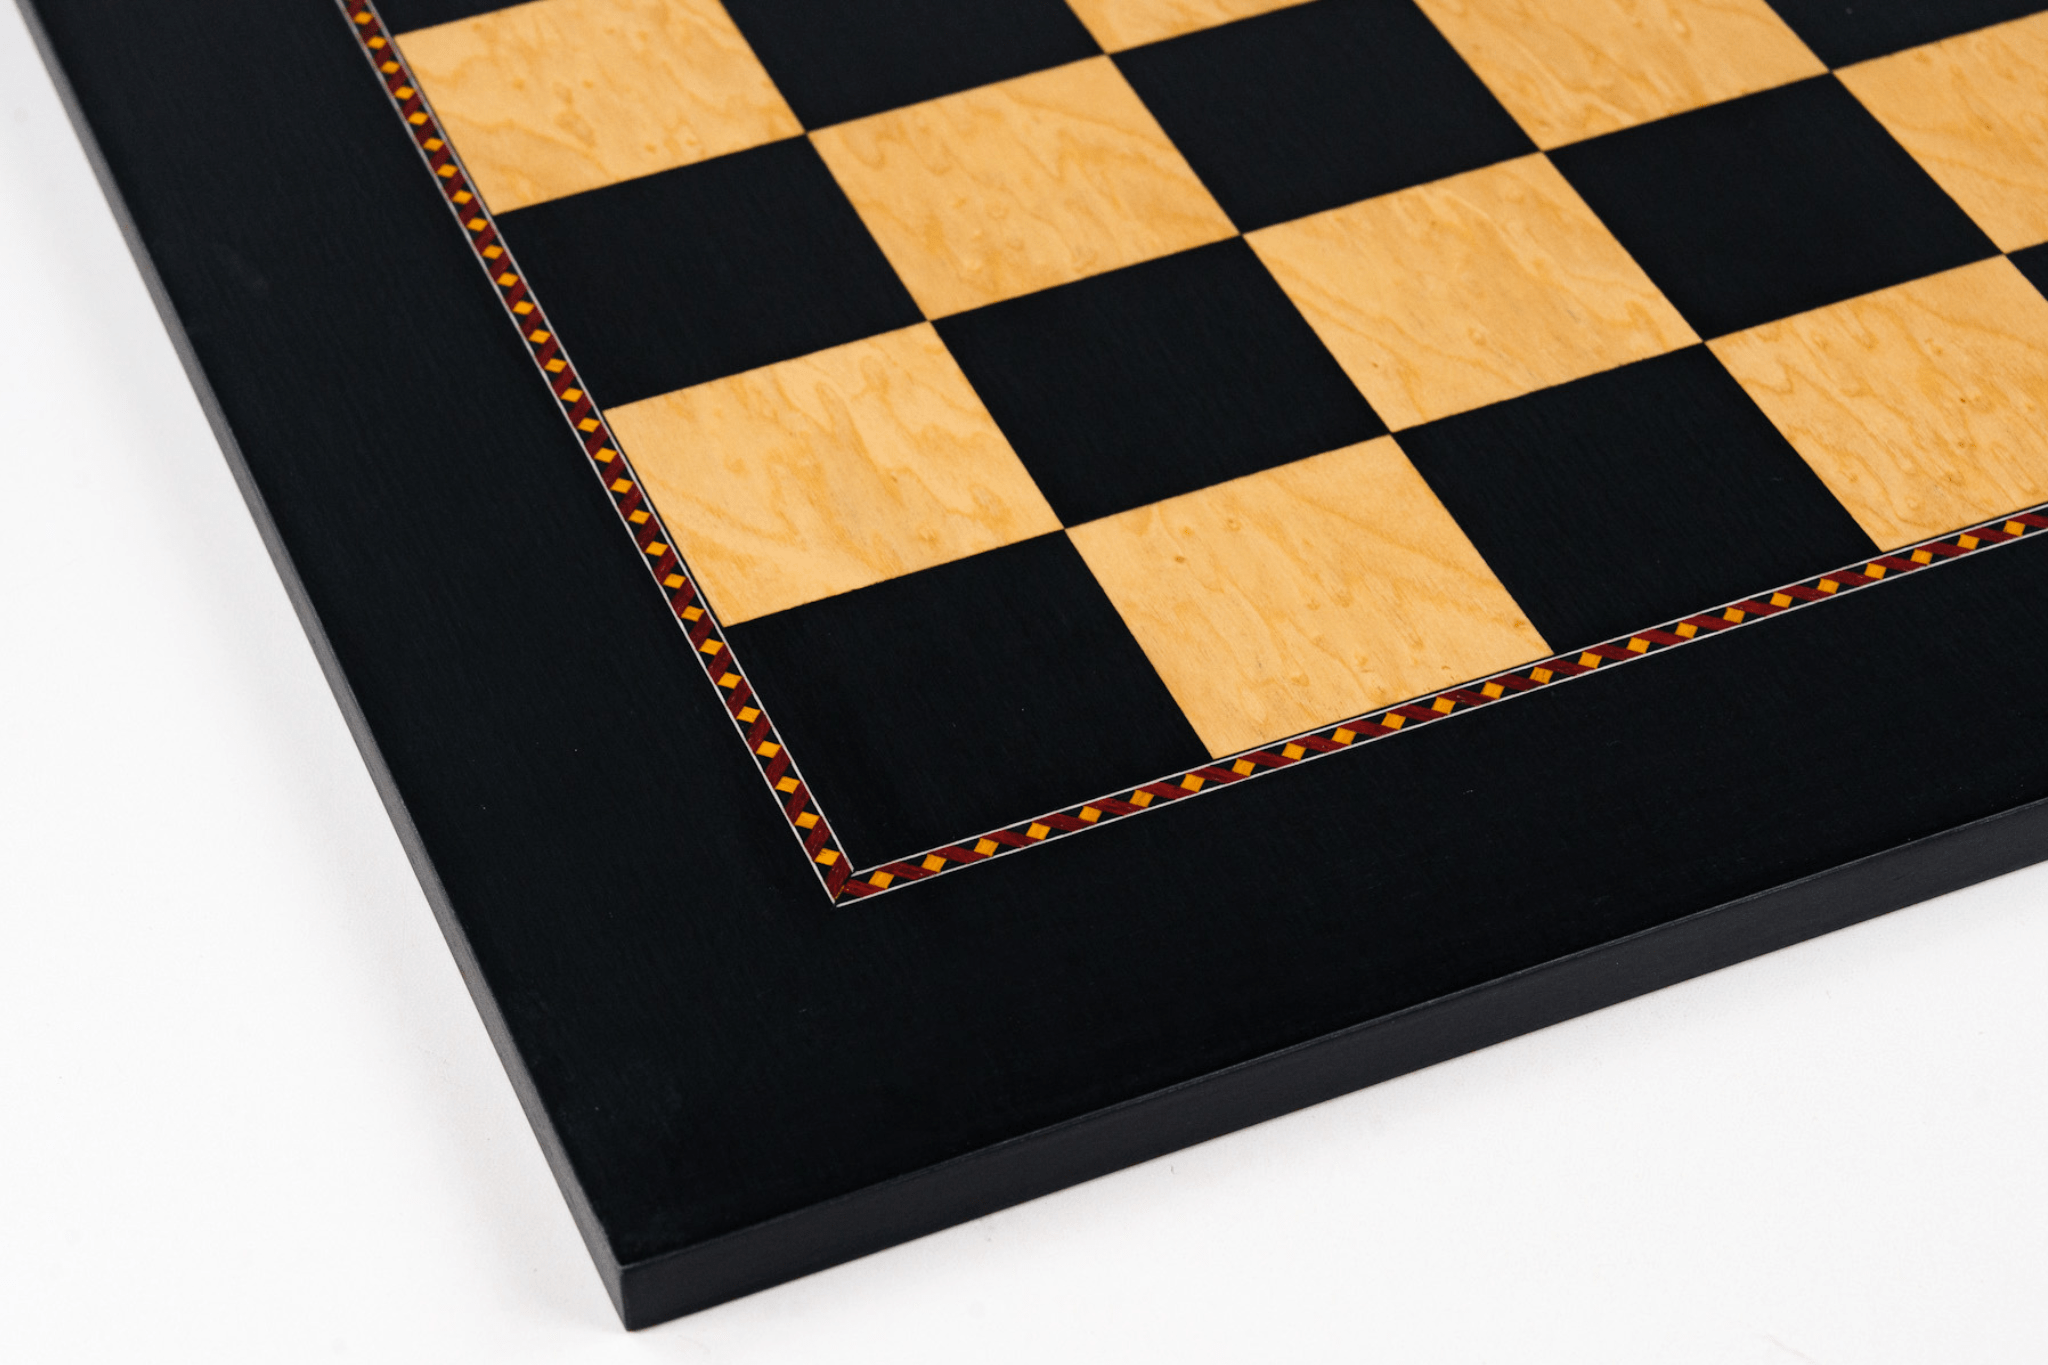 21.5" Queen's Gambit Chess Board (Original Design from Spain) - Chess Board - Chess-House